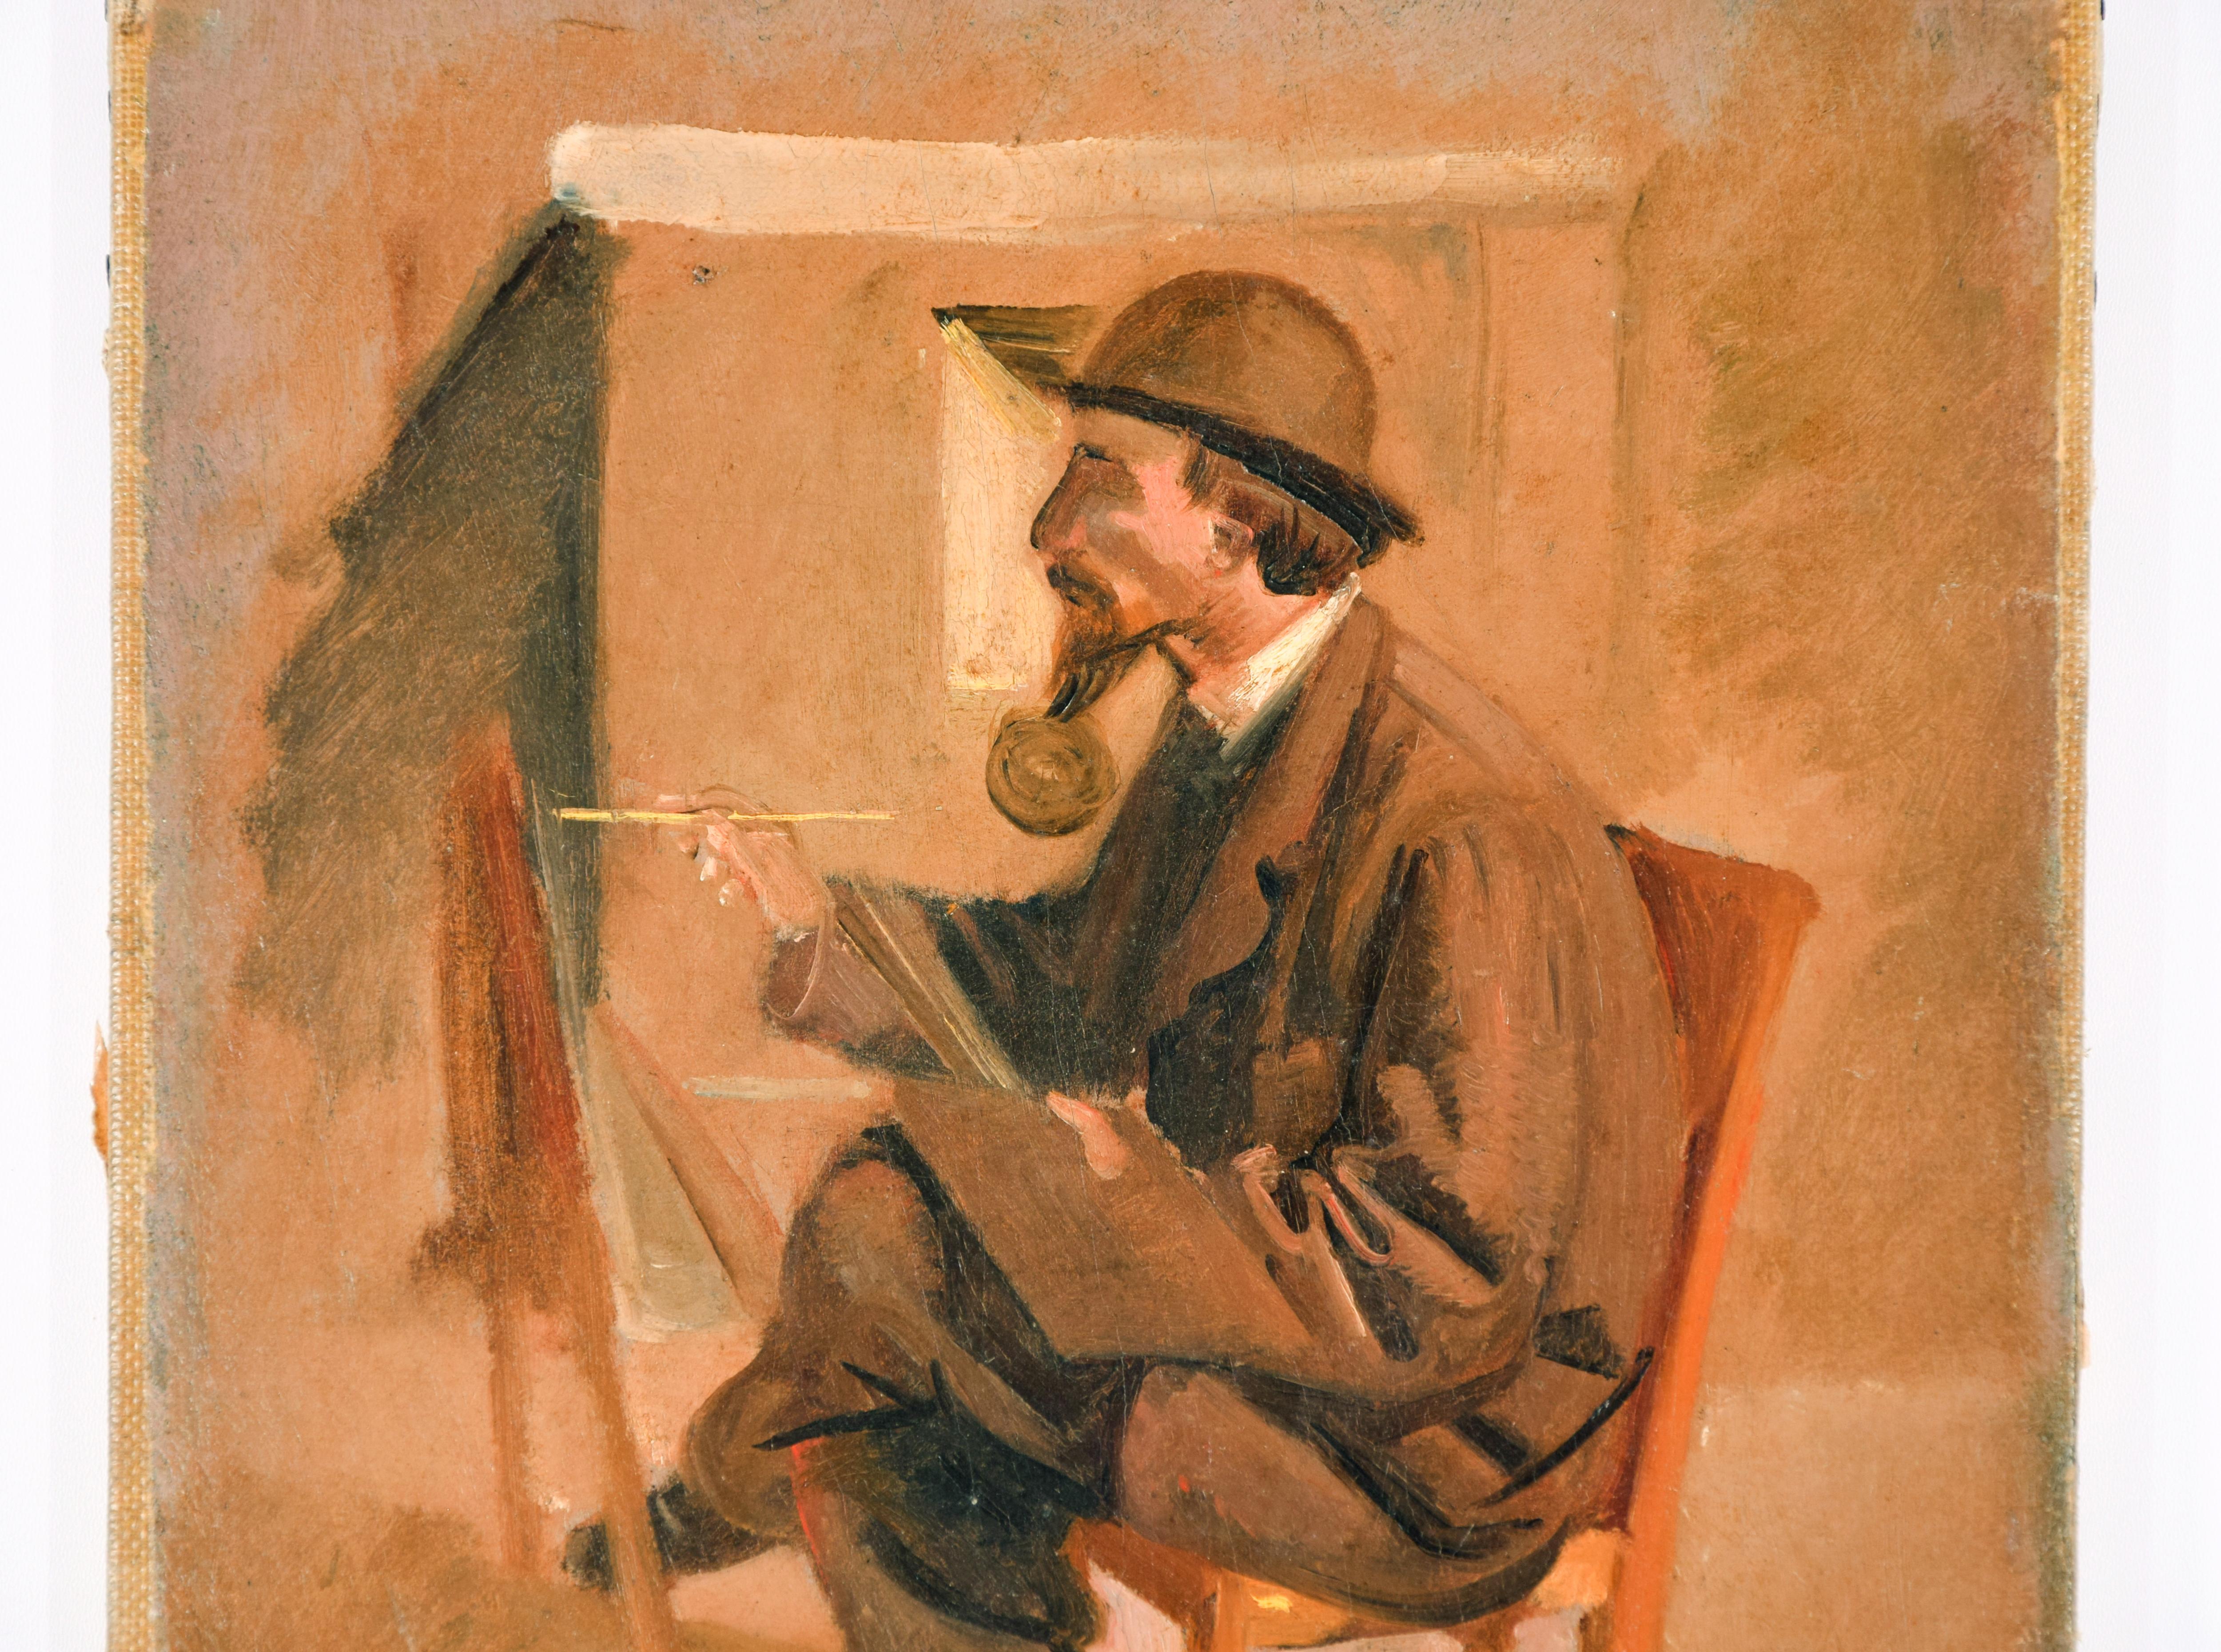 The Painter - Oil on Canvas attr. to V. Cabianca - Late 19th Century  - Painting by Vincenzo Cabianca (attr.)